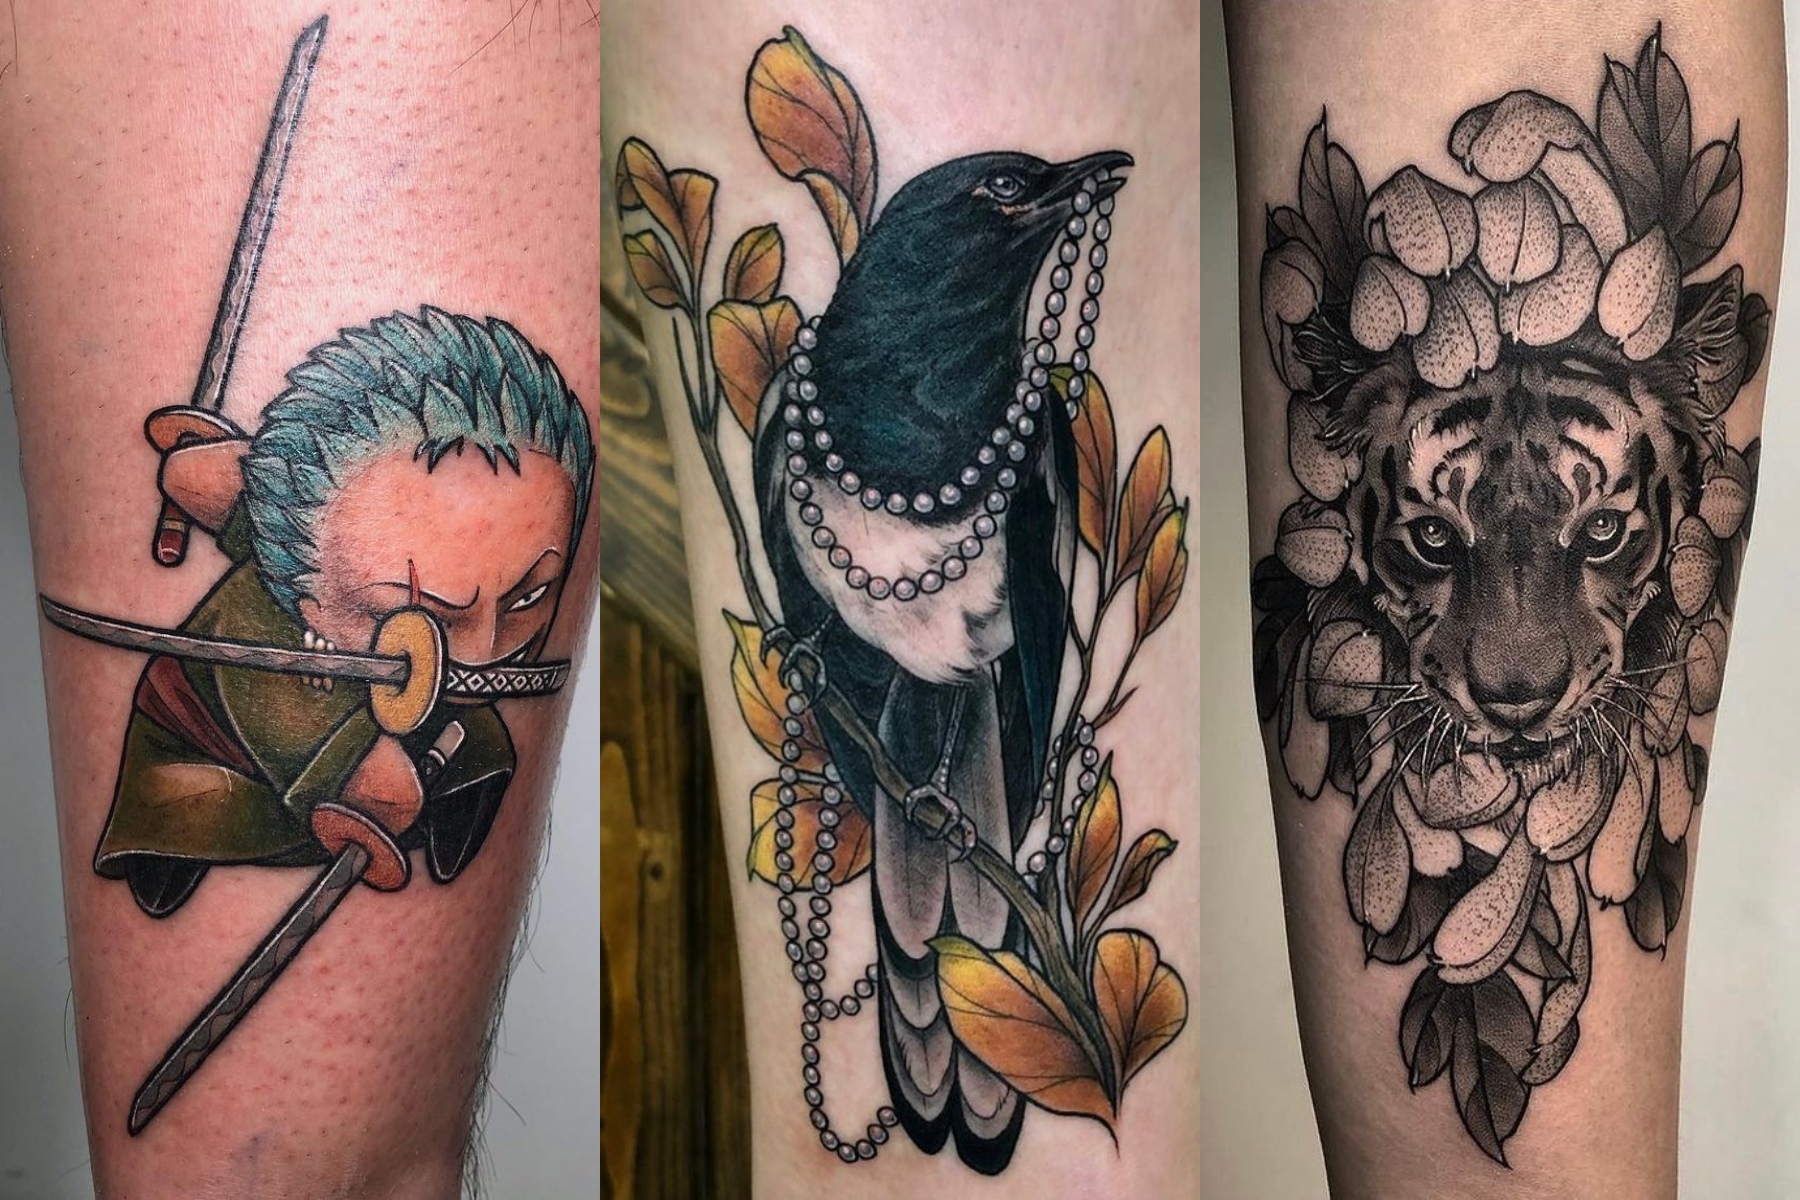 The Ink List: Getting to know 3 Malaysian tattoo artists